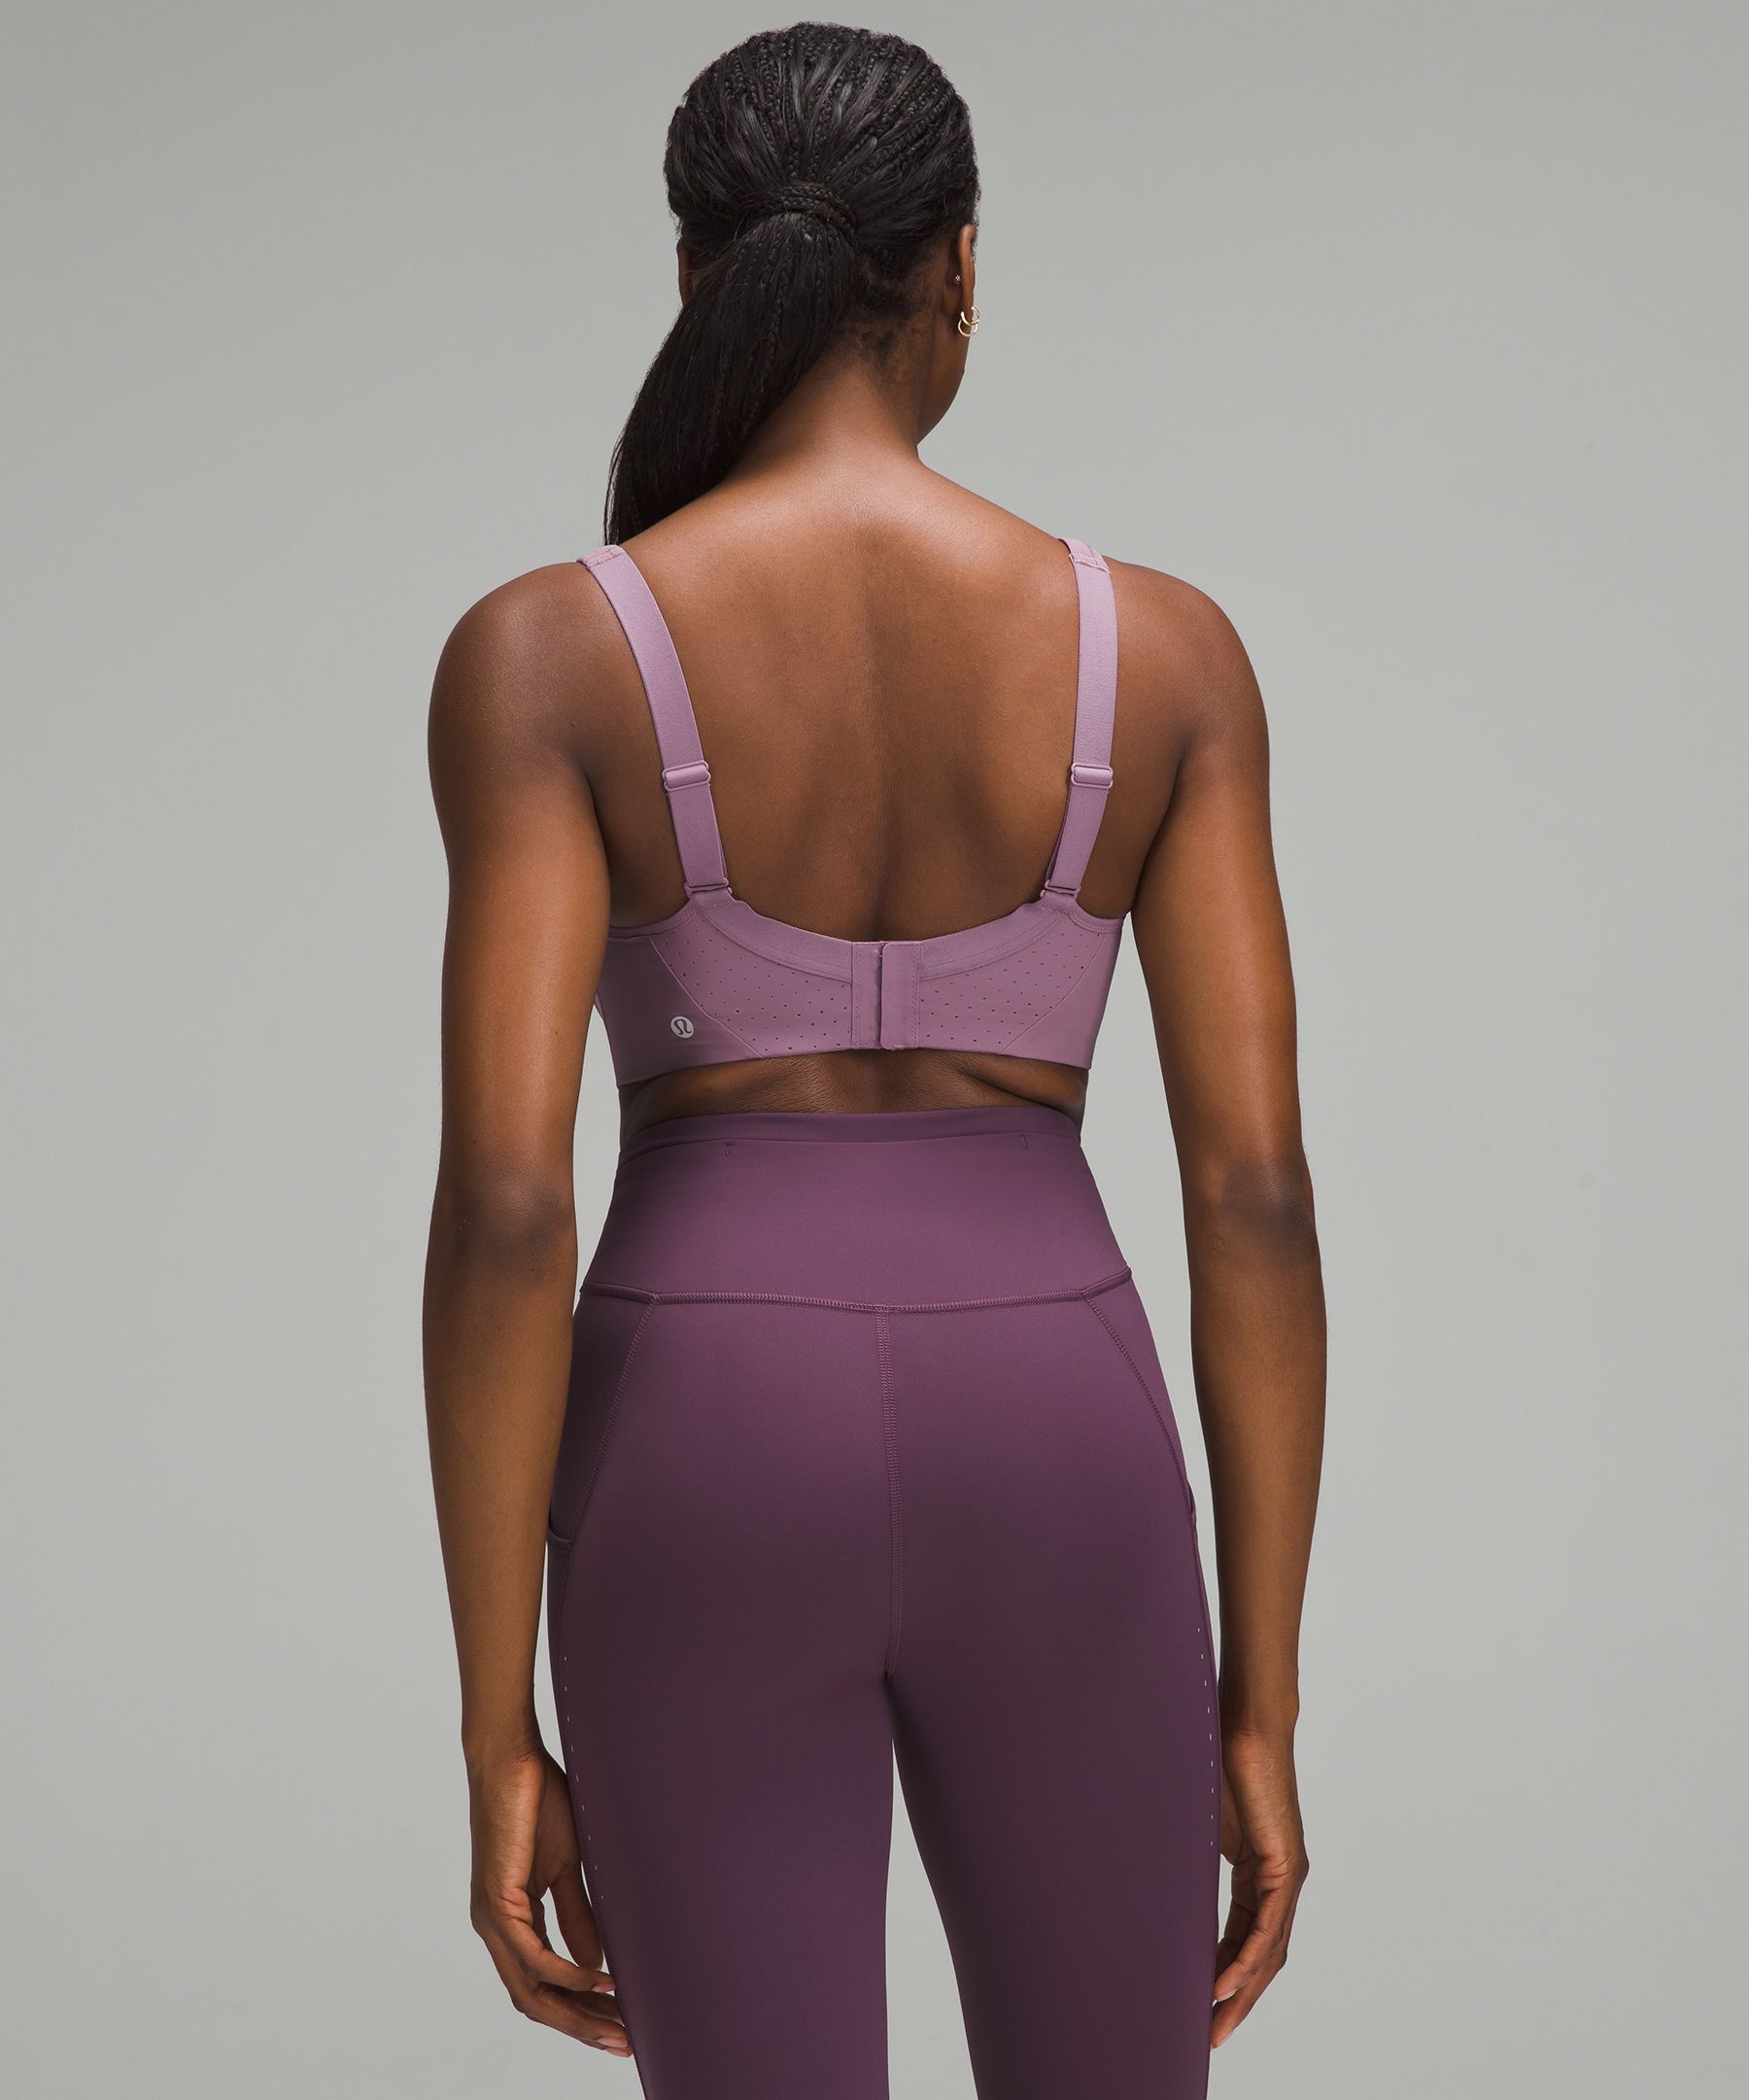 Lululemon Run Times Bra Black Size 34 C - $25 (63% Off Retail) - From  Dominique